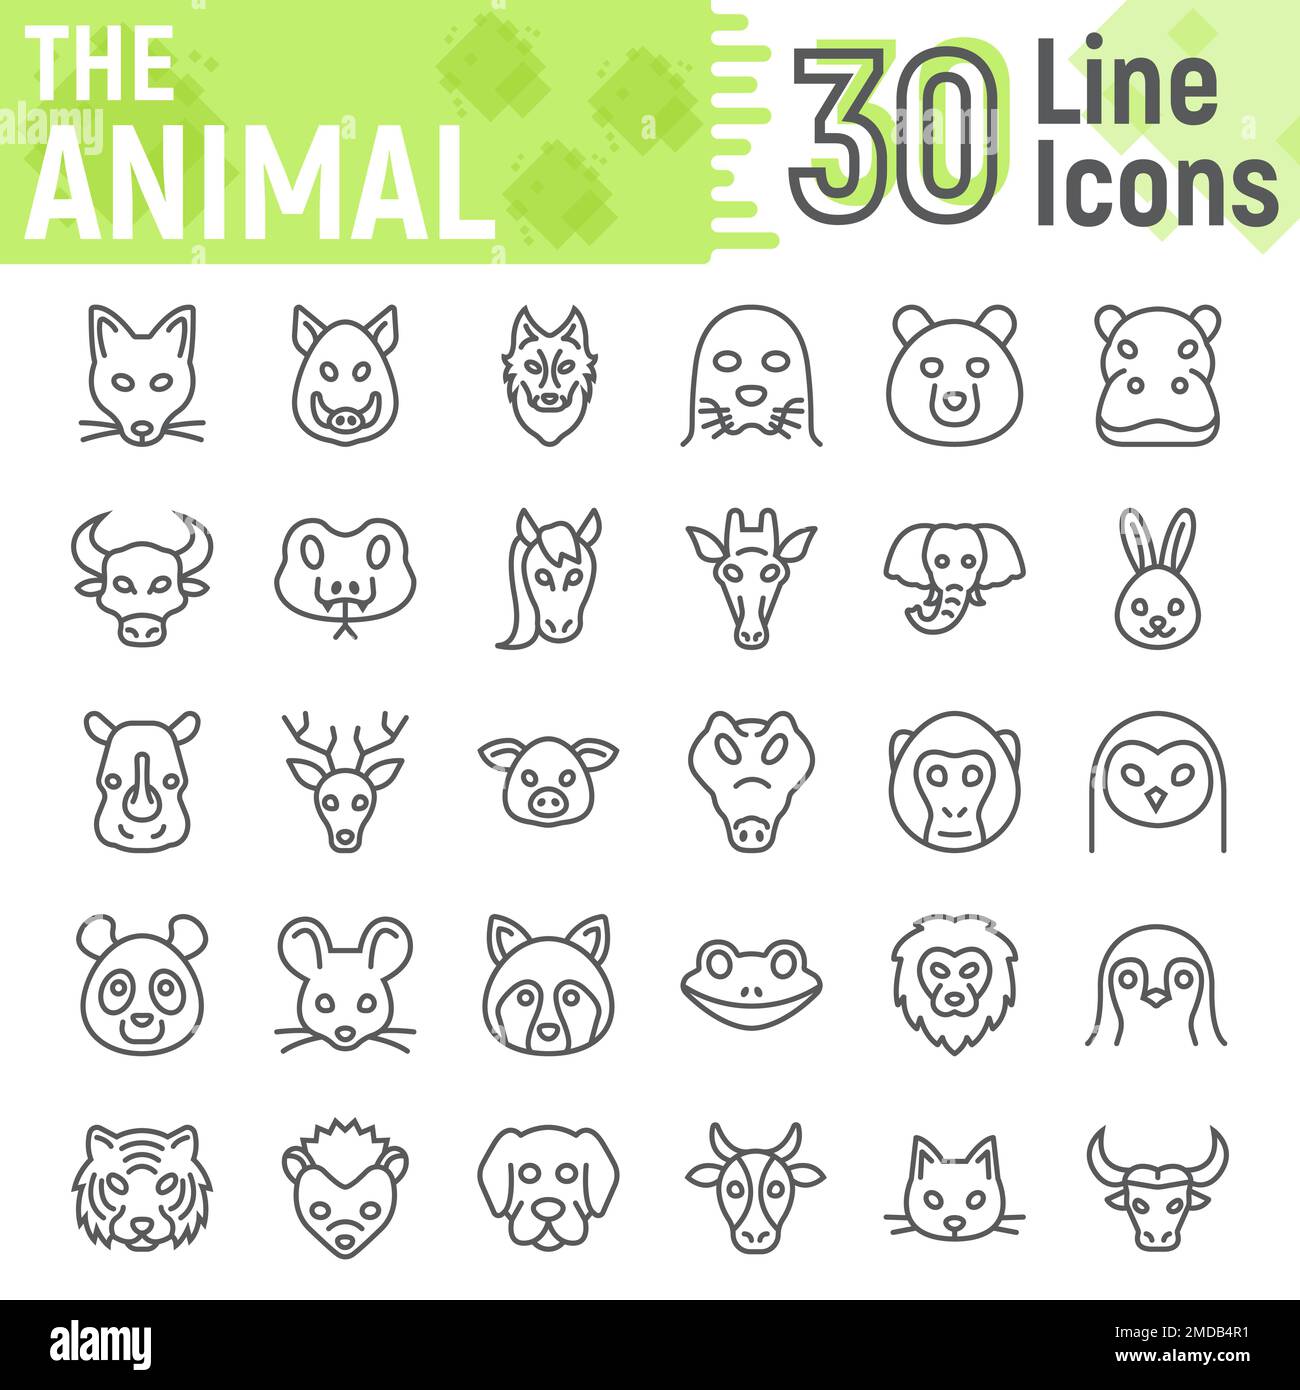 Animal line icon set, beast symbols collection, vector sketches, logo illustrations, farm signs linear pictograms package isolated on white background, eps 10. Stock Vector